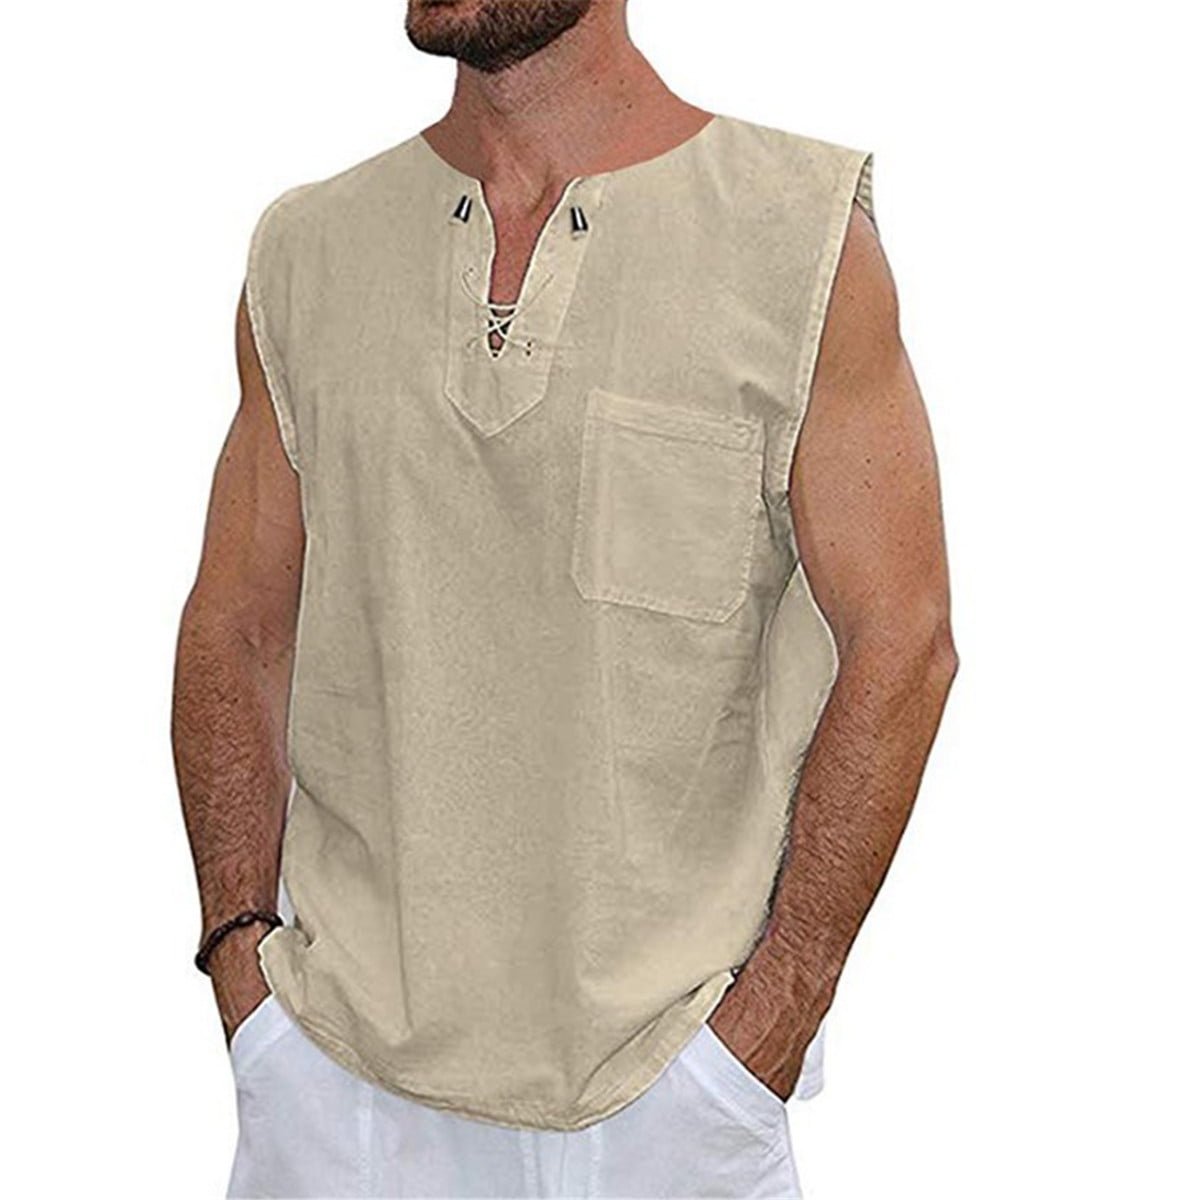 Hmlai Clearance Mens Shirts Casual Cotton Linen Loose Fit Solid Color Breathable Sleeveless Beach Tank Top Undershirt 